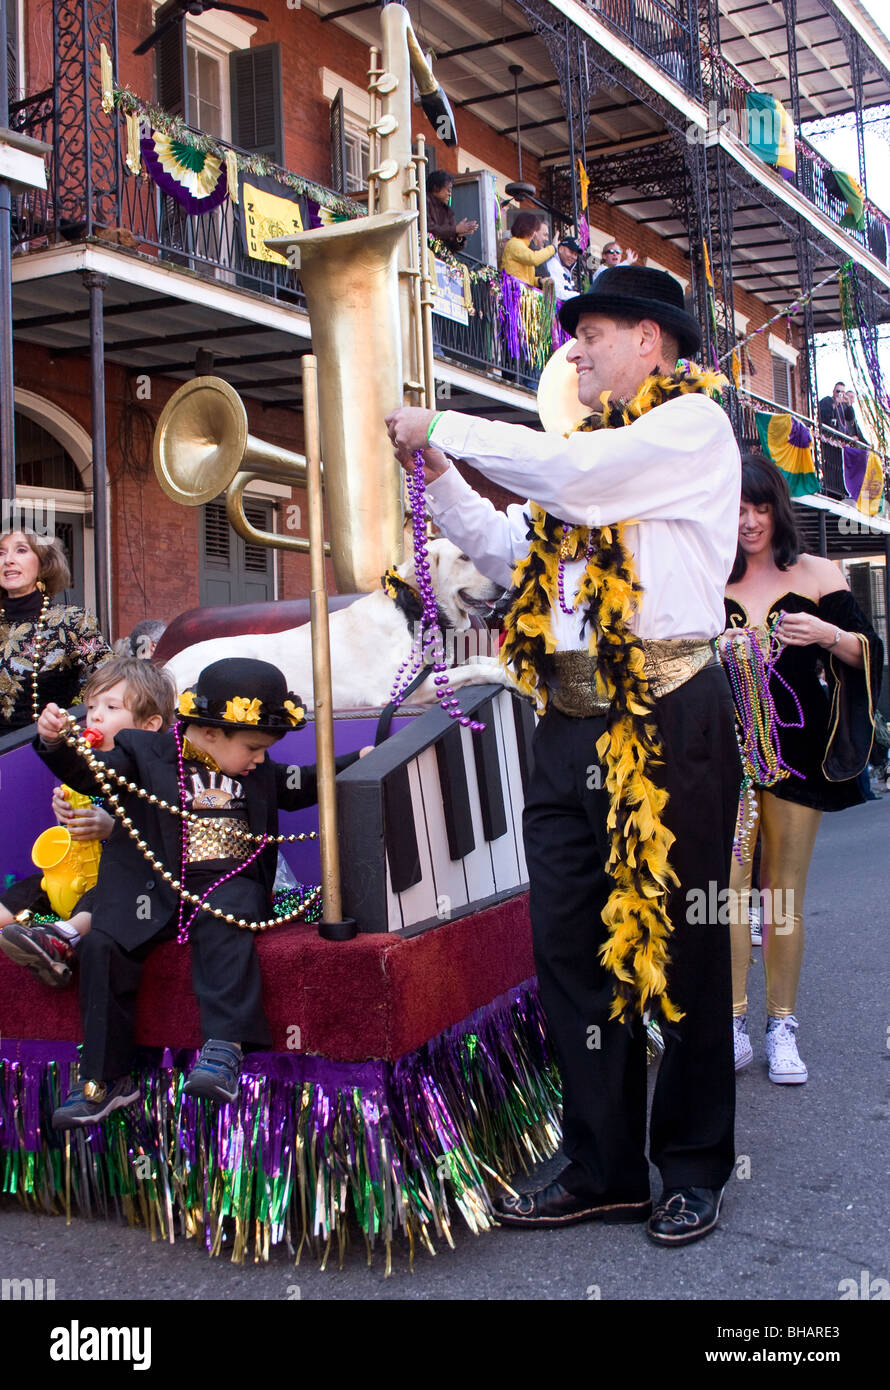 Throwing beads from a float in the Barkus dog parade. New Orleans, LA, USA. Stock Photo